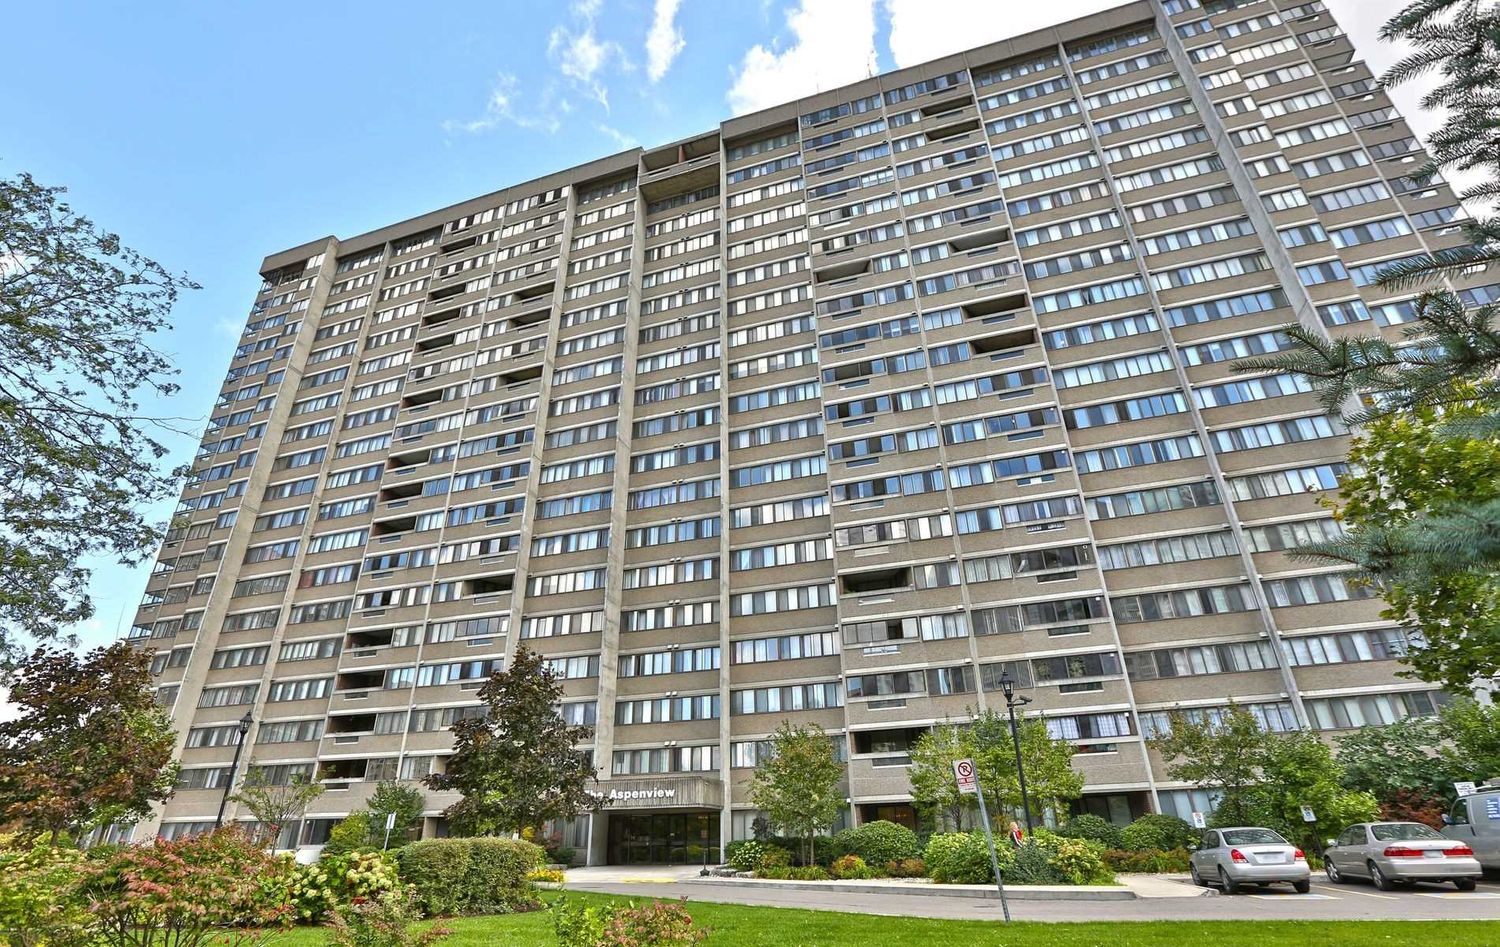 50 Elm Drive E. The Aspenview Condos is located in  Mississauga, Toronto - image #2 of 3